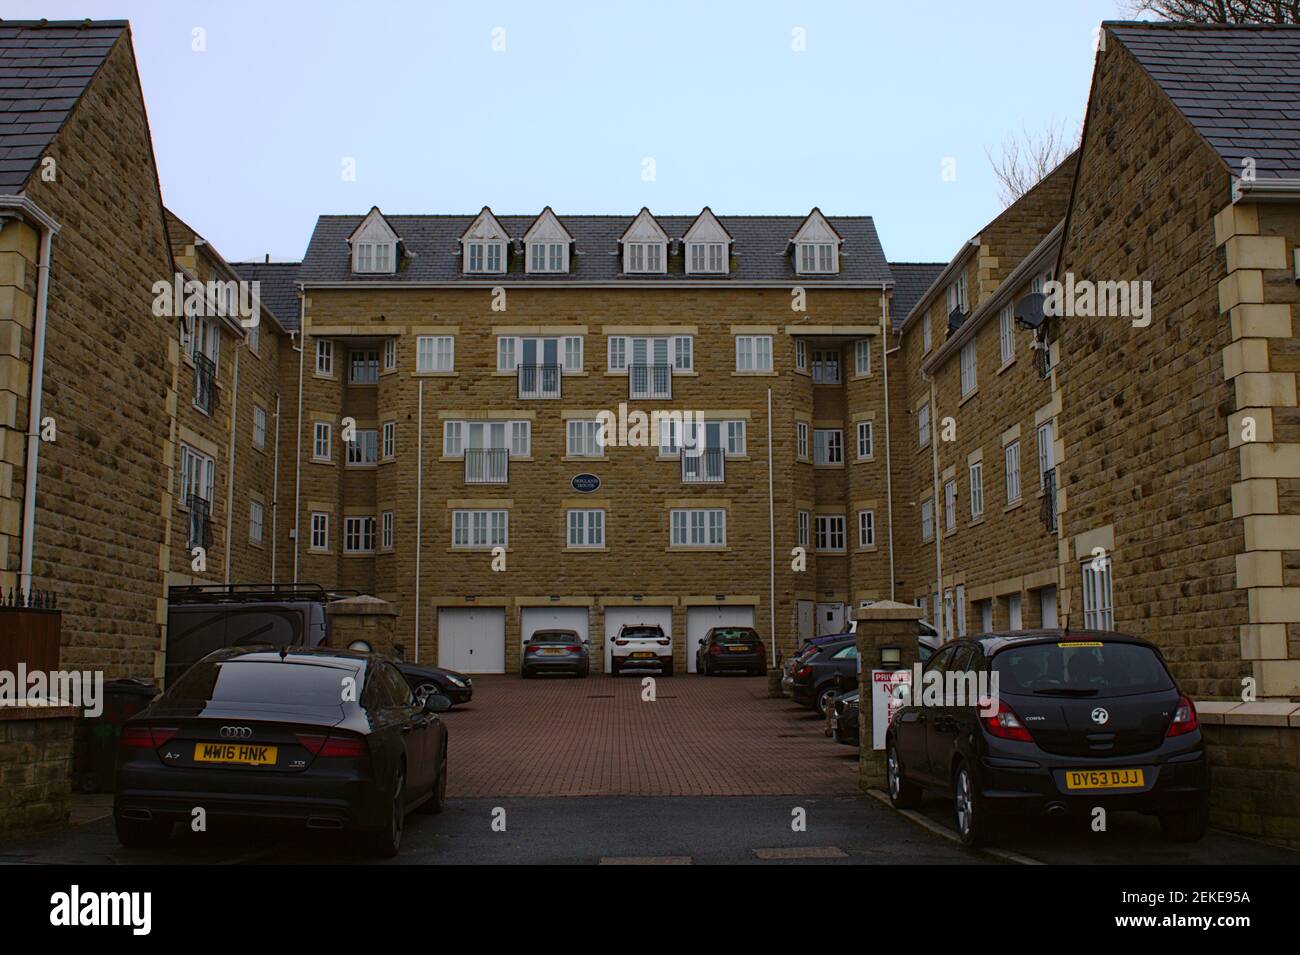 Holland House stone built apartments with garages underneath, home ownership concept Stock Photo